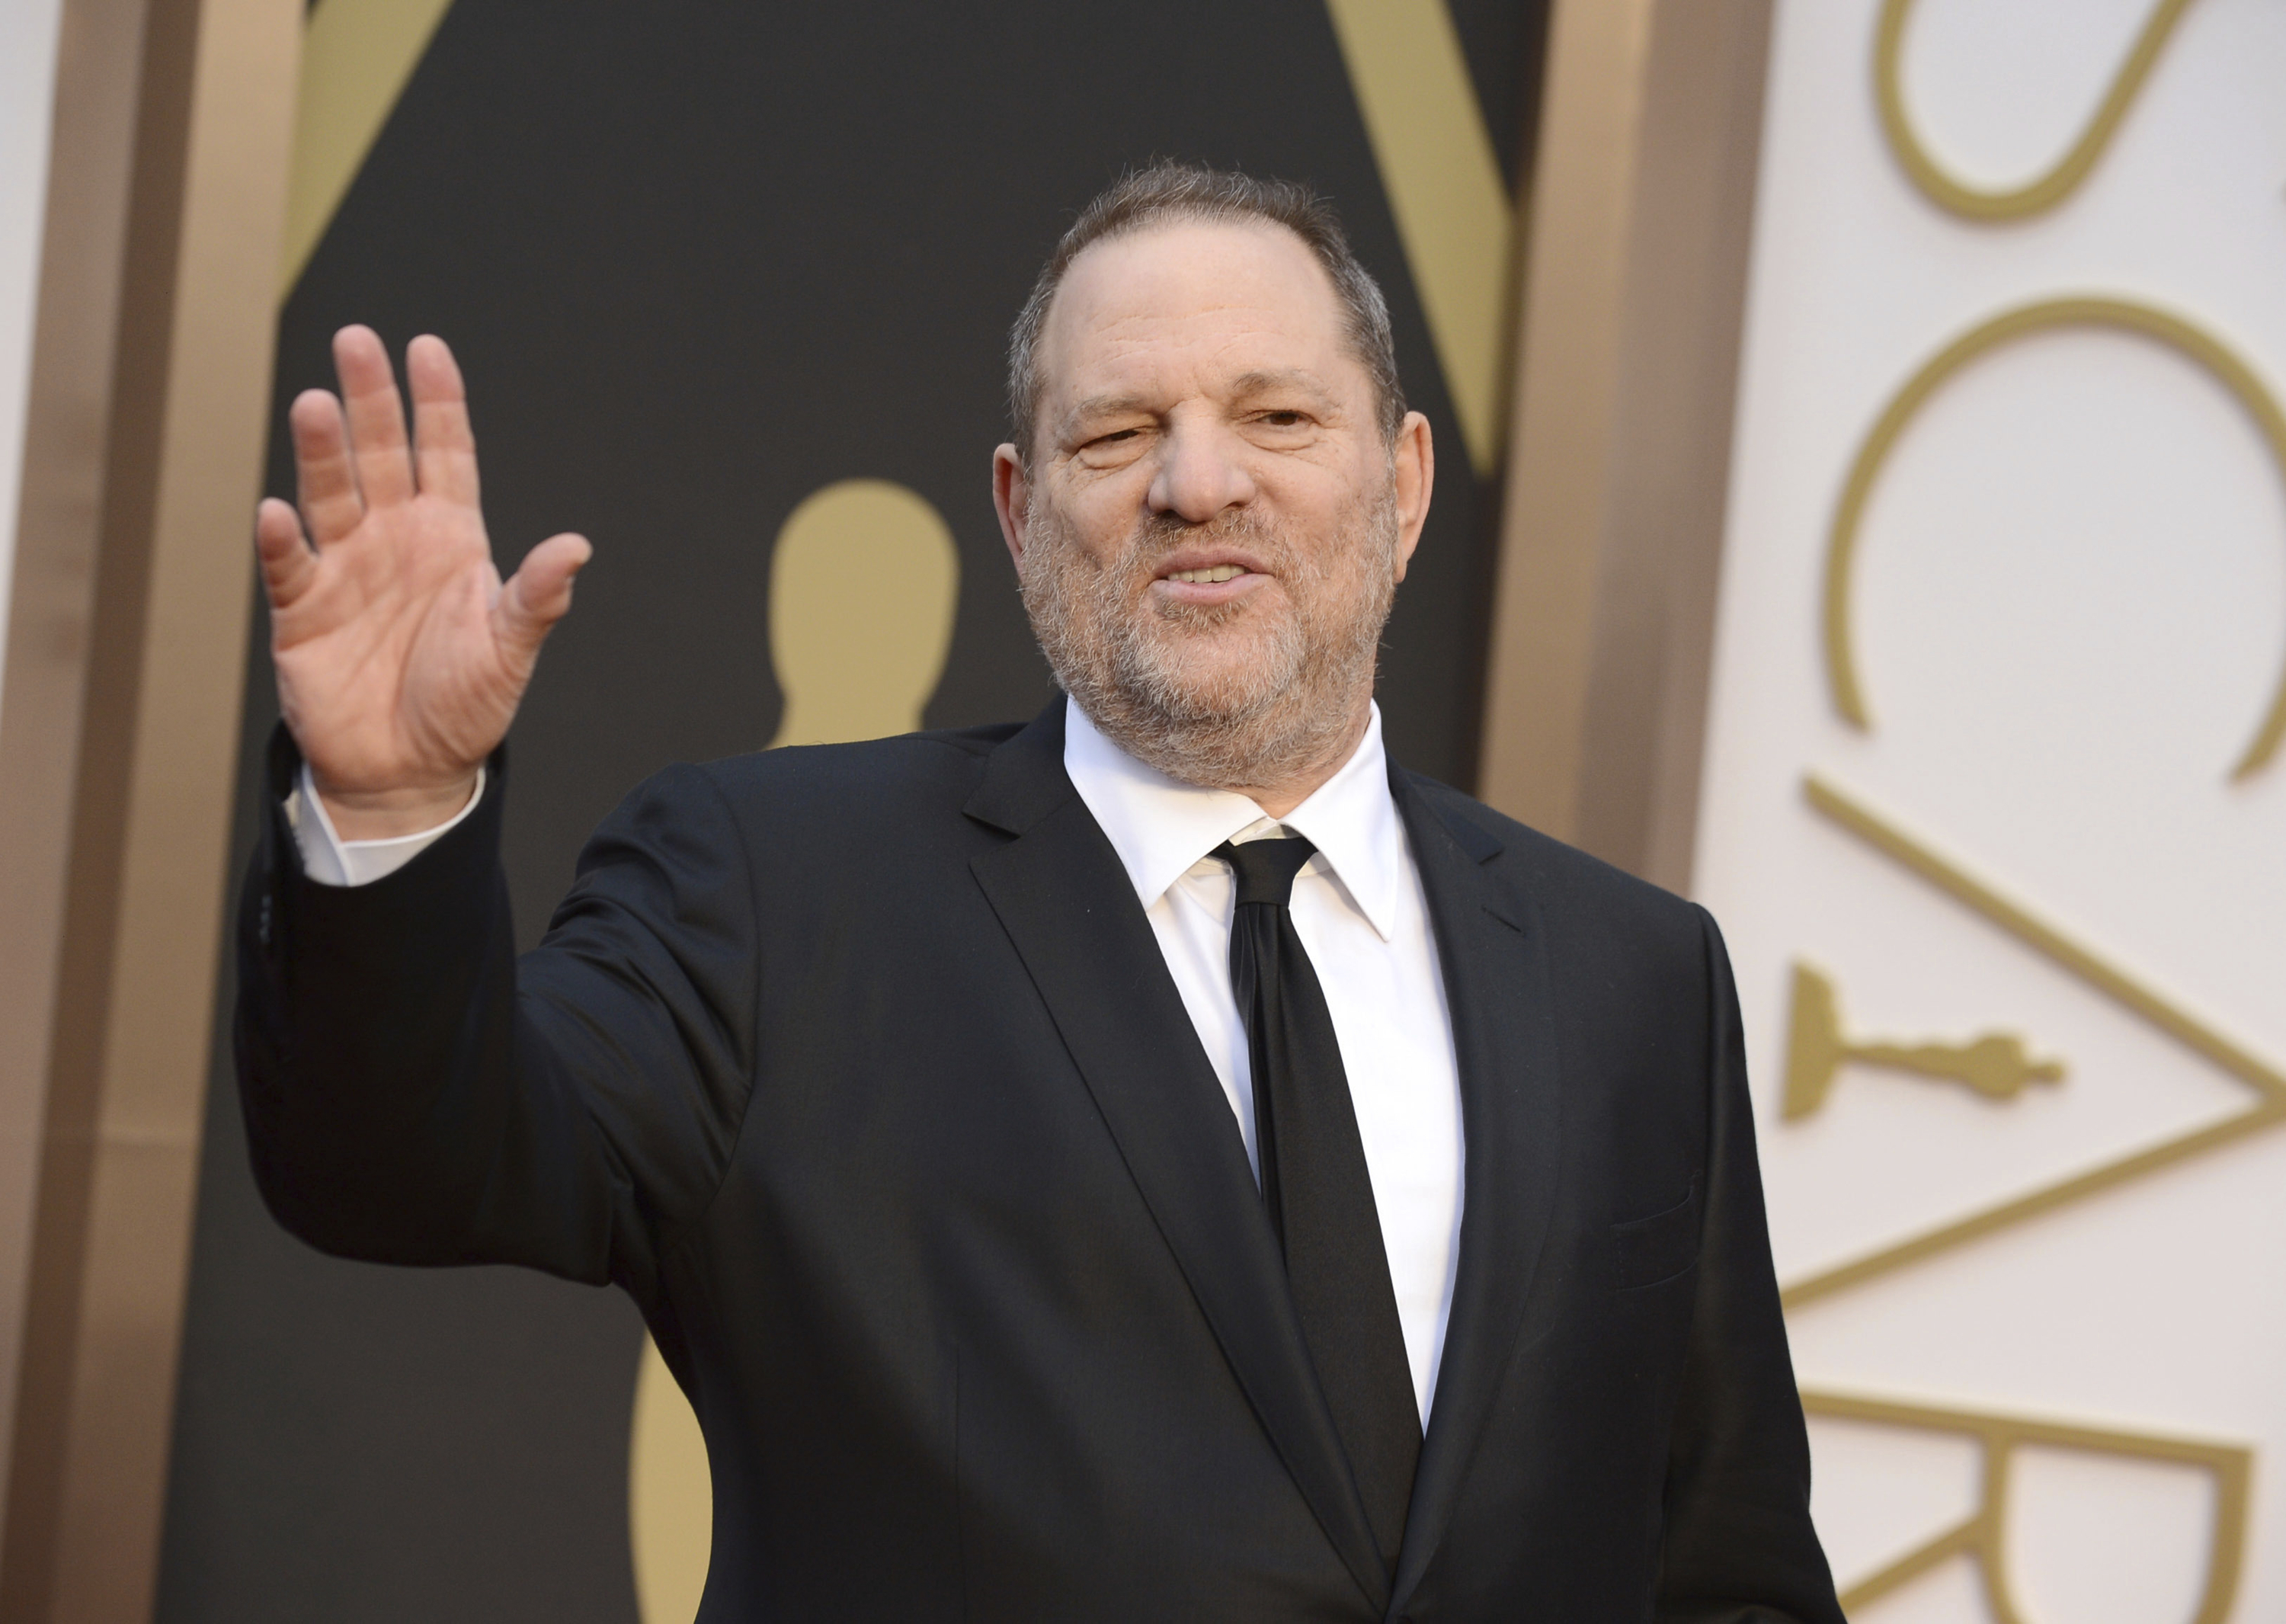 In this March 2, 2014 file photo, Harvey Weinstein arrives at the Oscars in Los Angeles. (Jordan Strauss—Invision/AP)